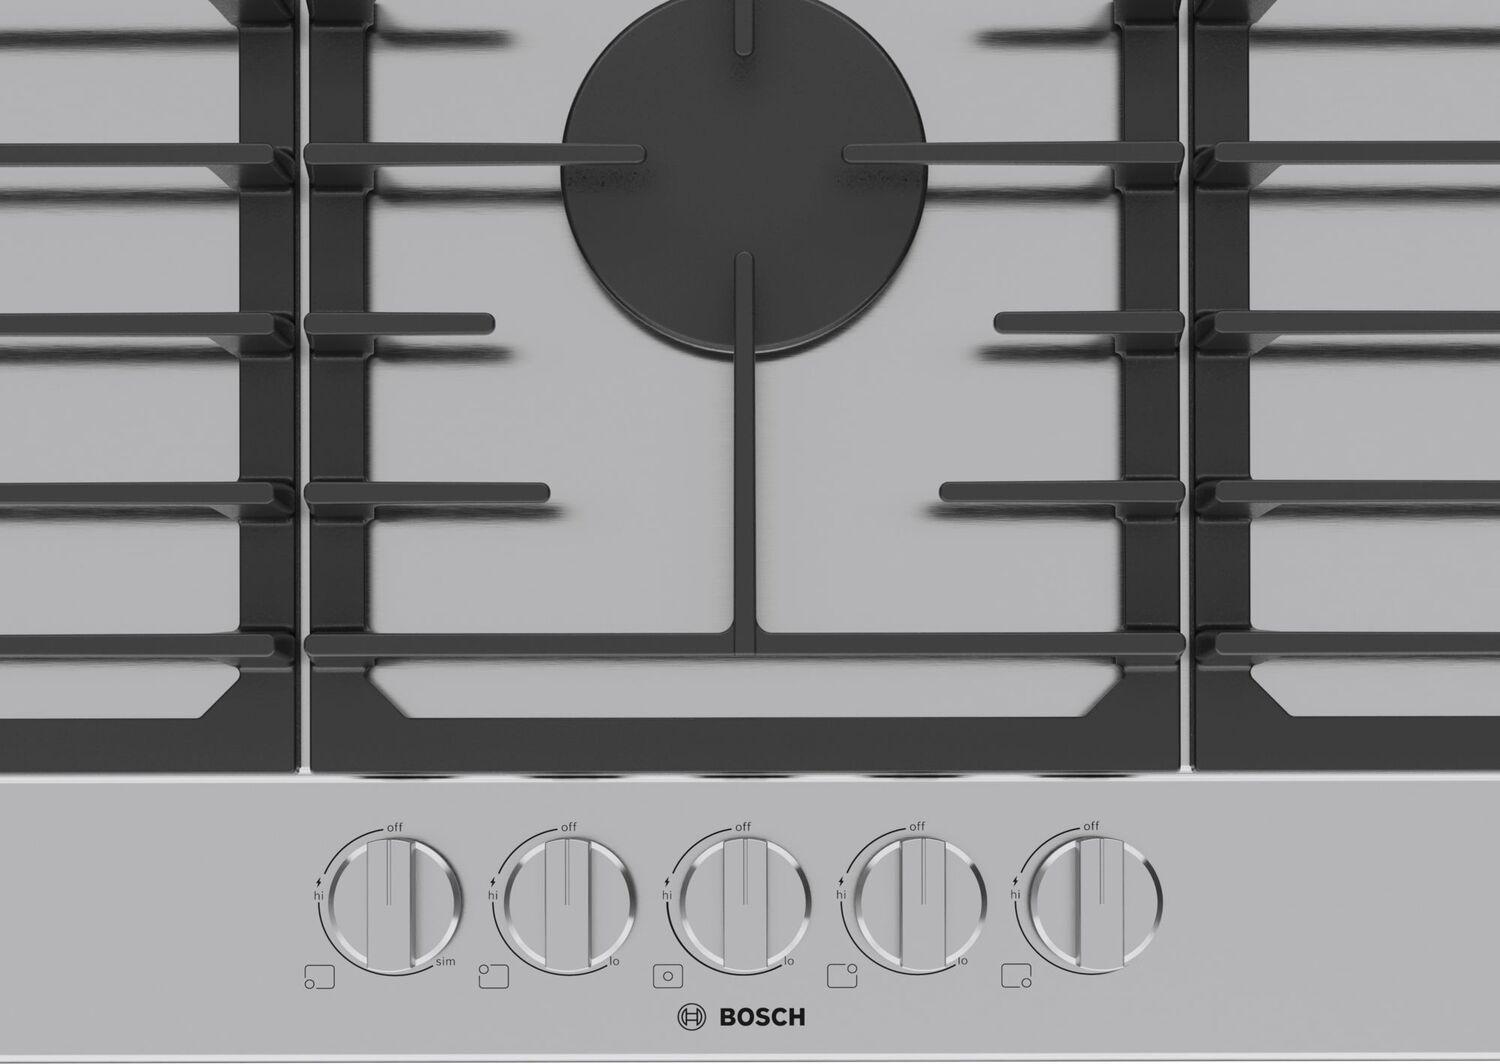 Bosch 300 Series Gas Cooktop 36" Stainless steel NGM3650UC